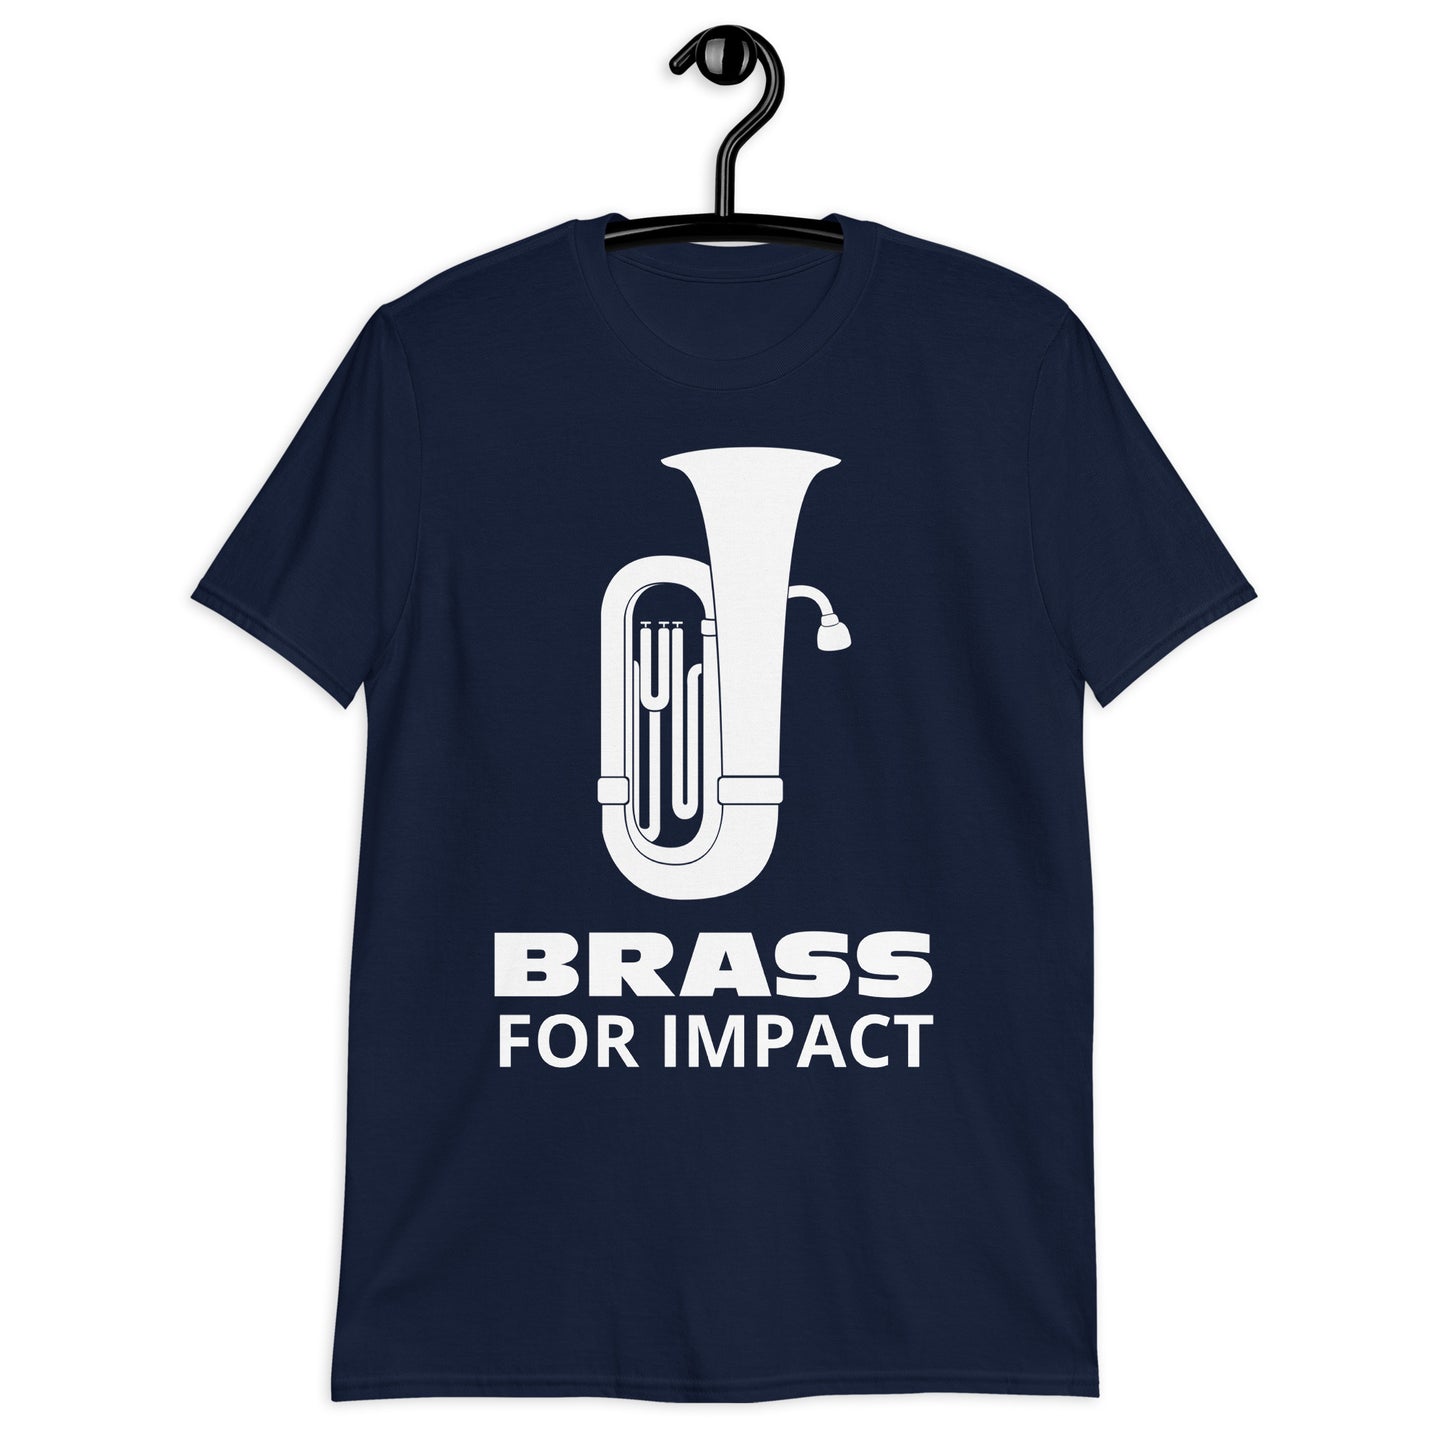 Brass for Impact. Unisex T-Shirt for Tuba players